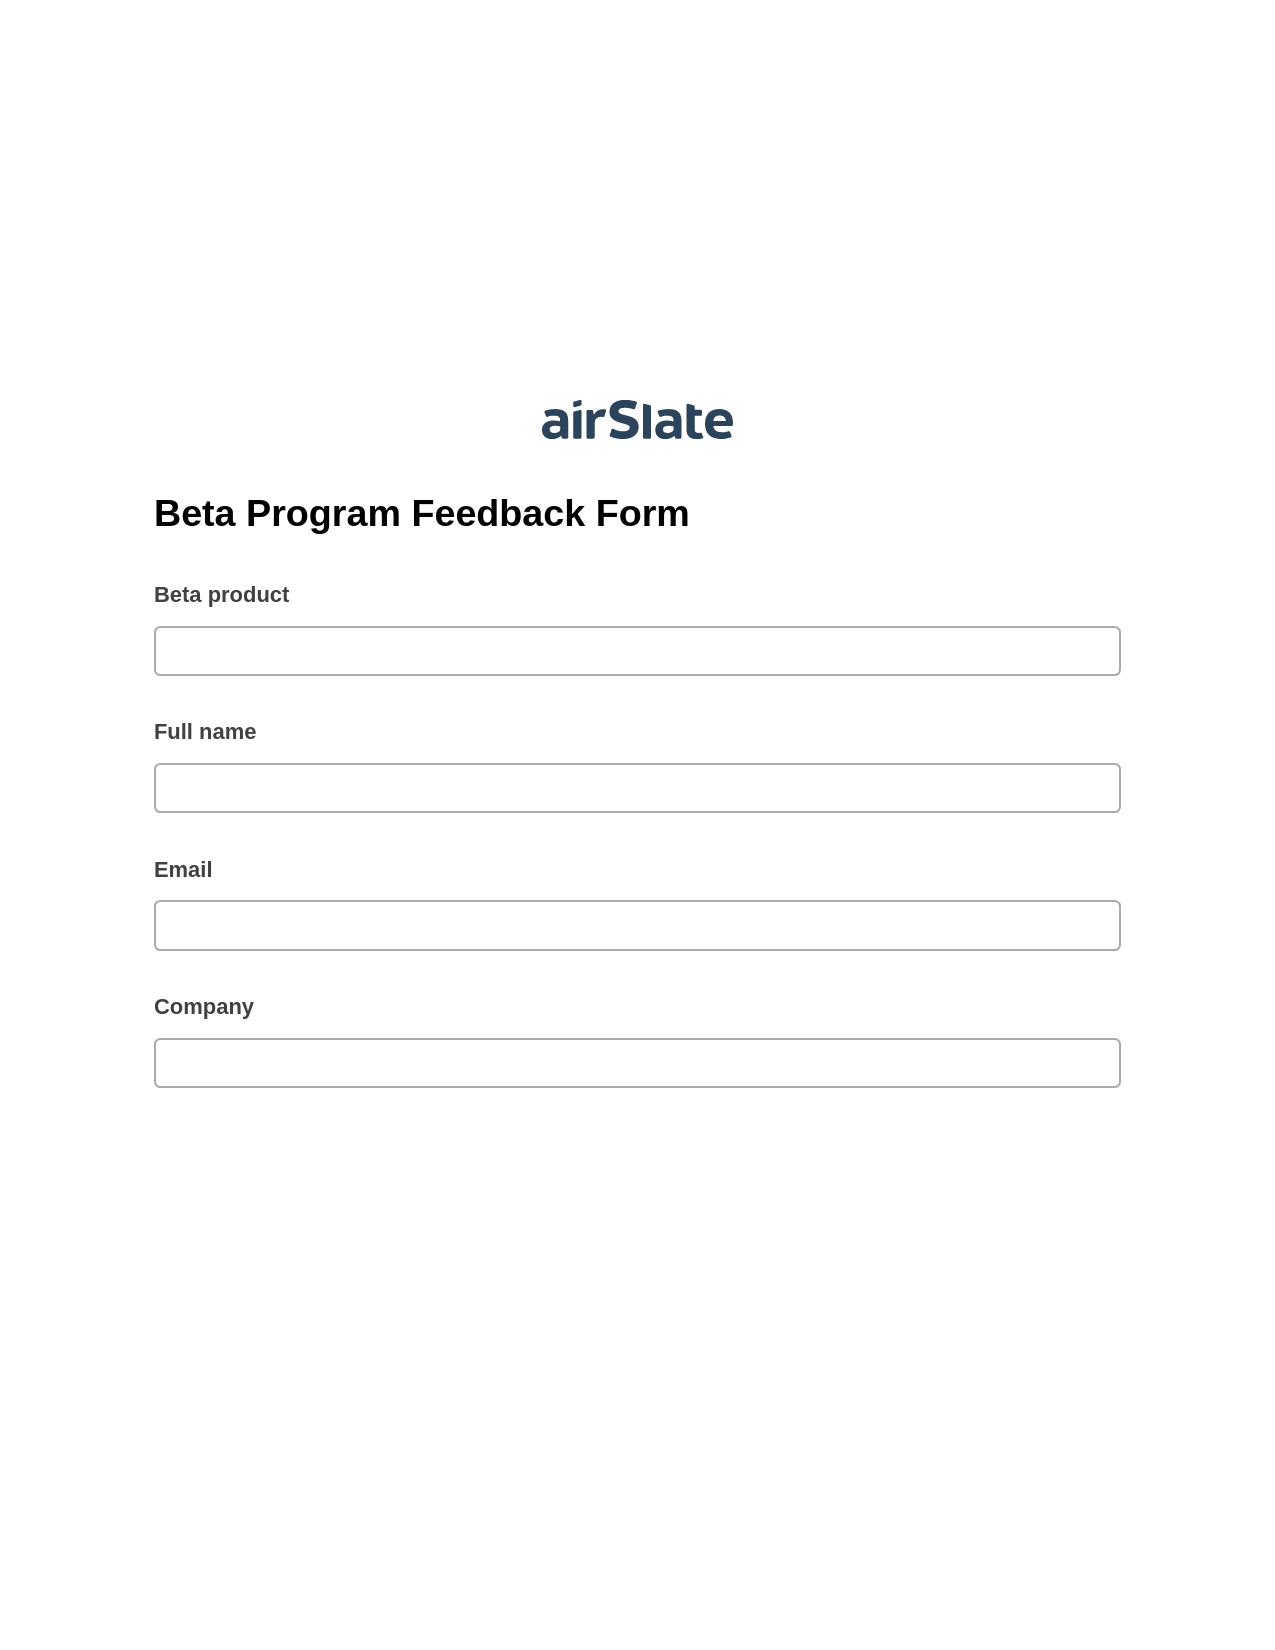 Multirole Beta Program Feedback Form Pre-fill from NetSuite Records Bot, Update Salesforce Record Bot, Post-finish Document Bot